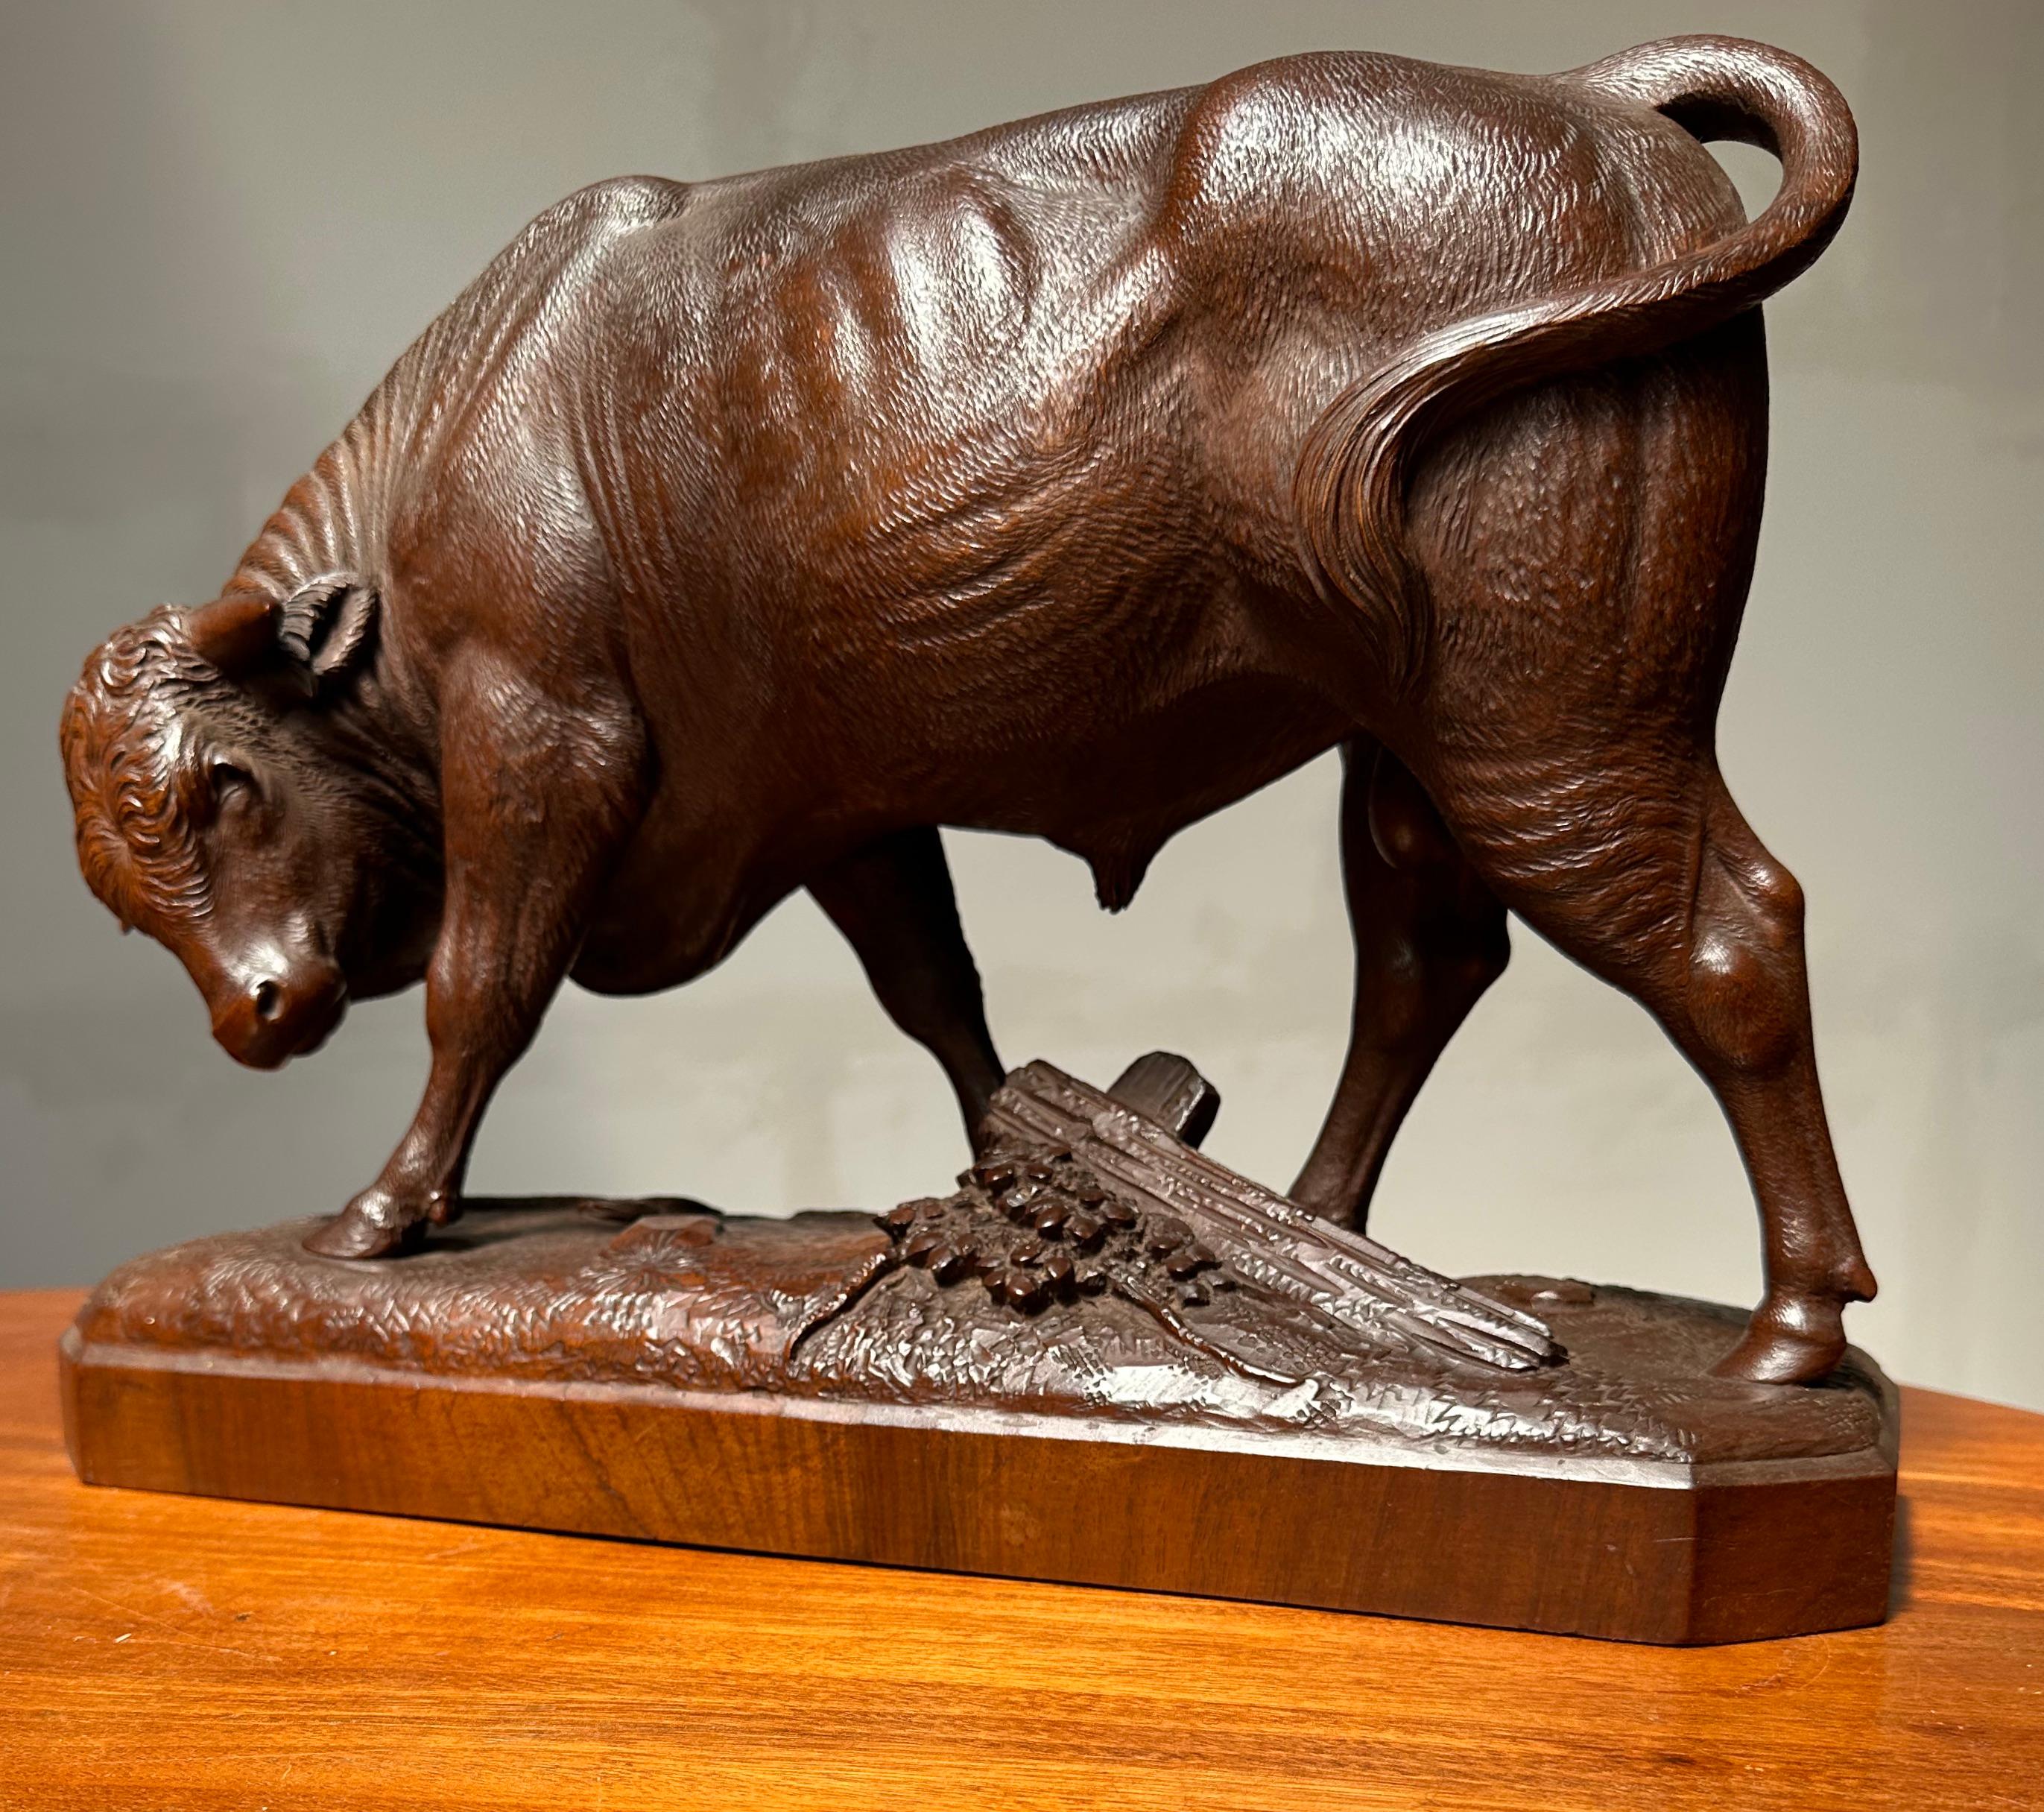 Museum quality and condition, hand carved livestock sculpture.

This marvelous bull is for the collectors of the rarest and best quality Black Forest sculptures. Incredibly detailed, hand carved and large in size this bull sculpture can only be from